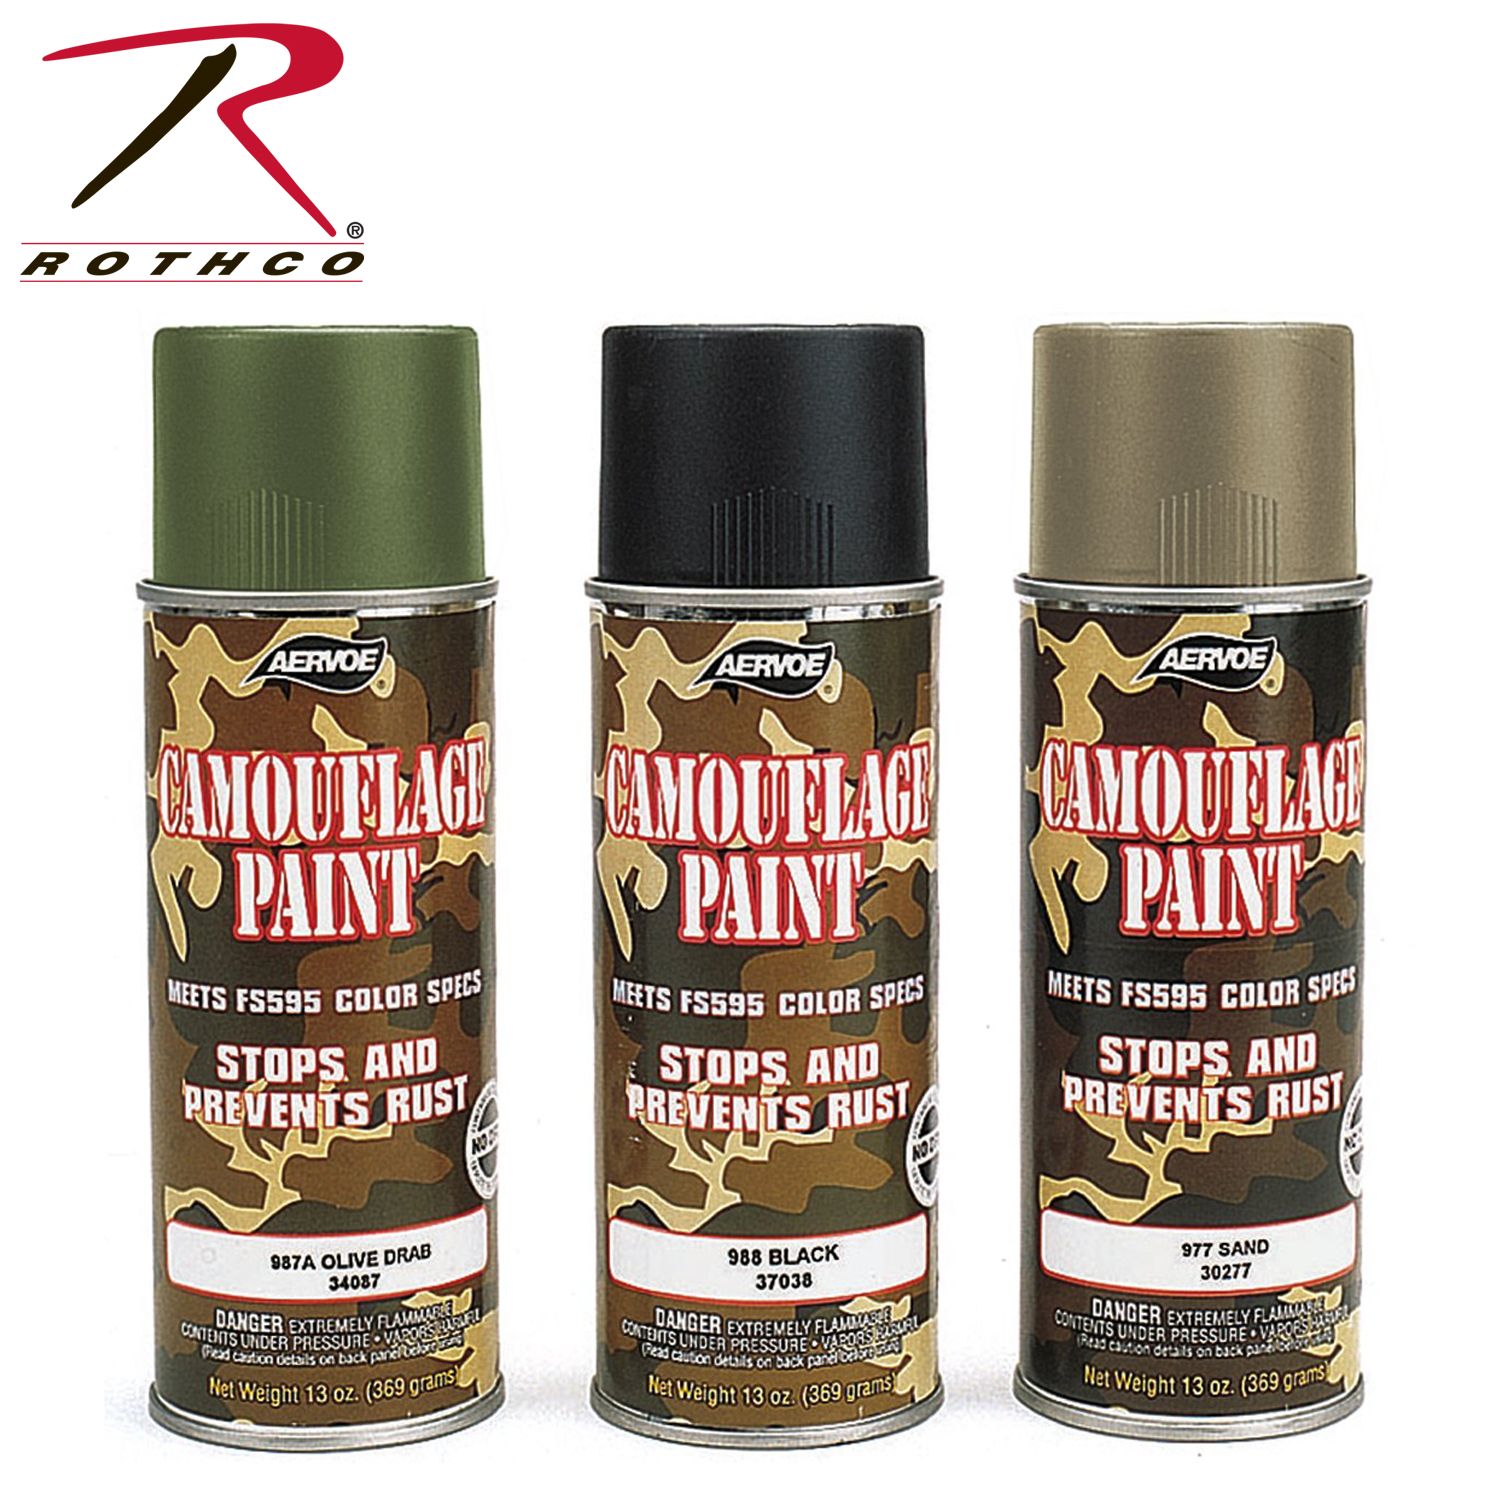 Buy 8223_Rothco Camouflage Spray Paint - Rothco Online at Best